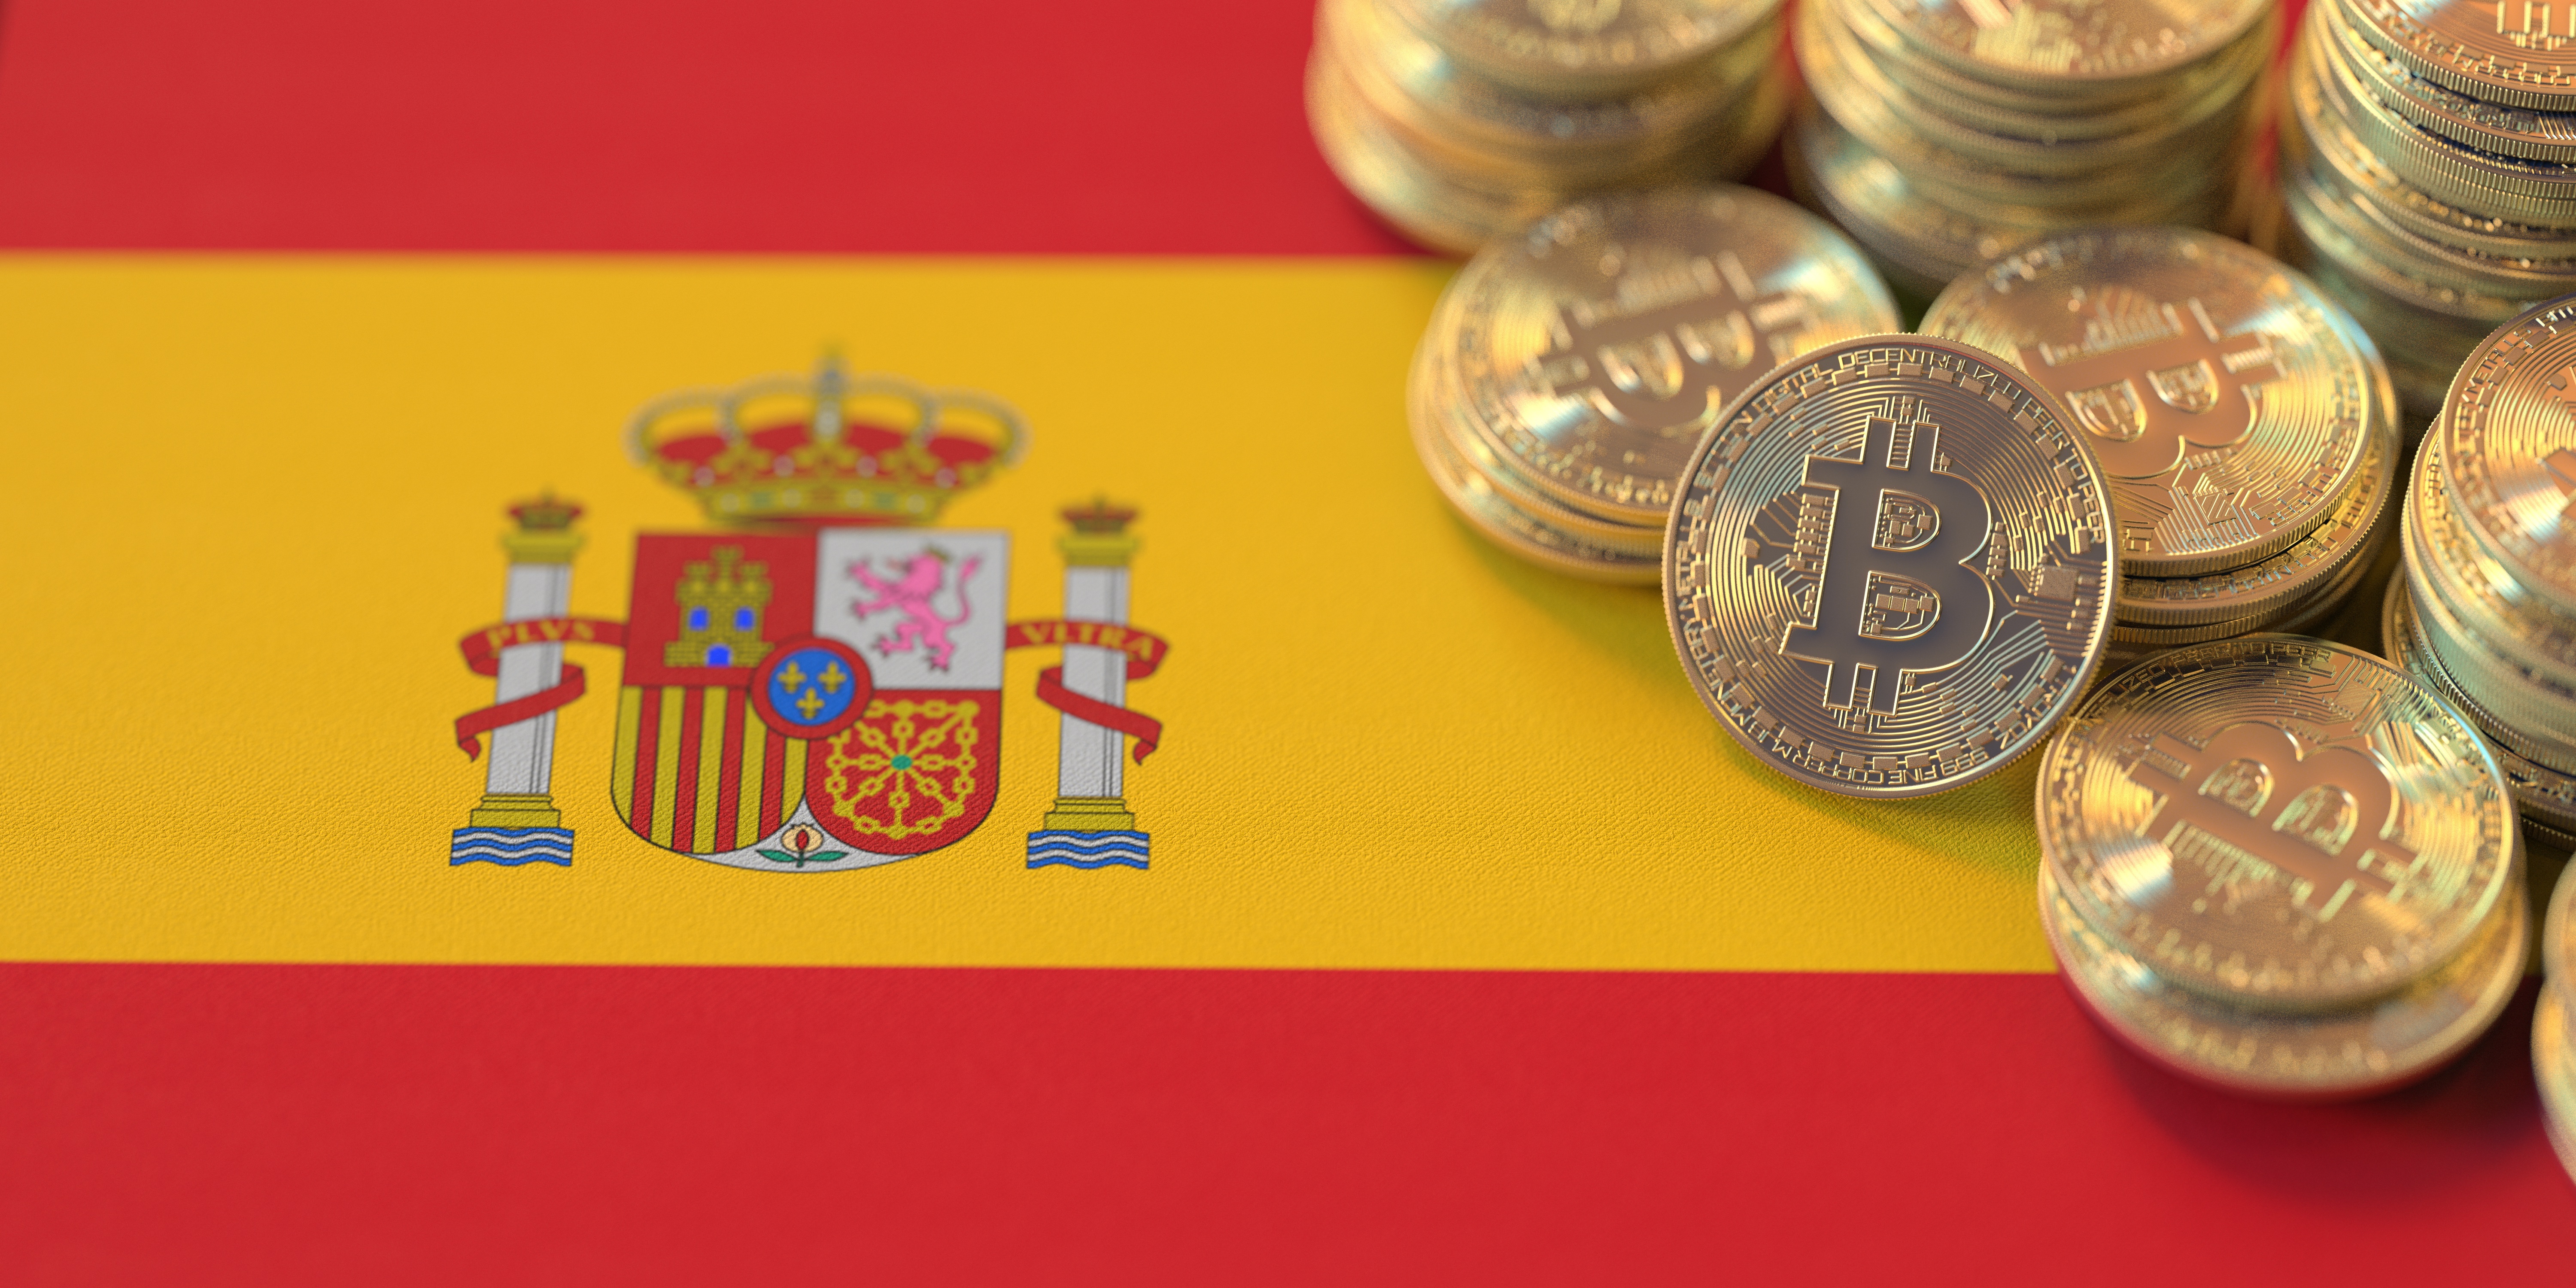 A pile of tokens representing Bitcoin on the Spanish flag.